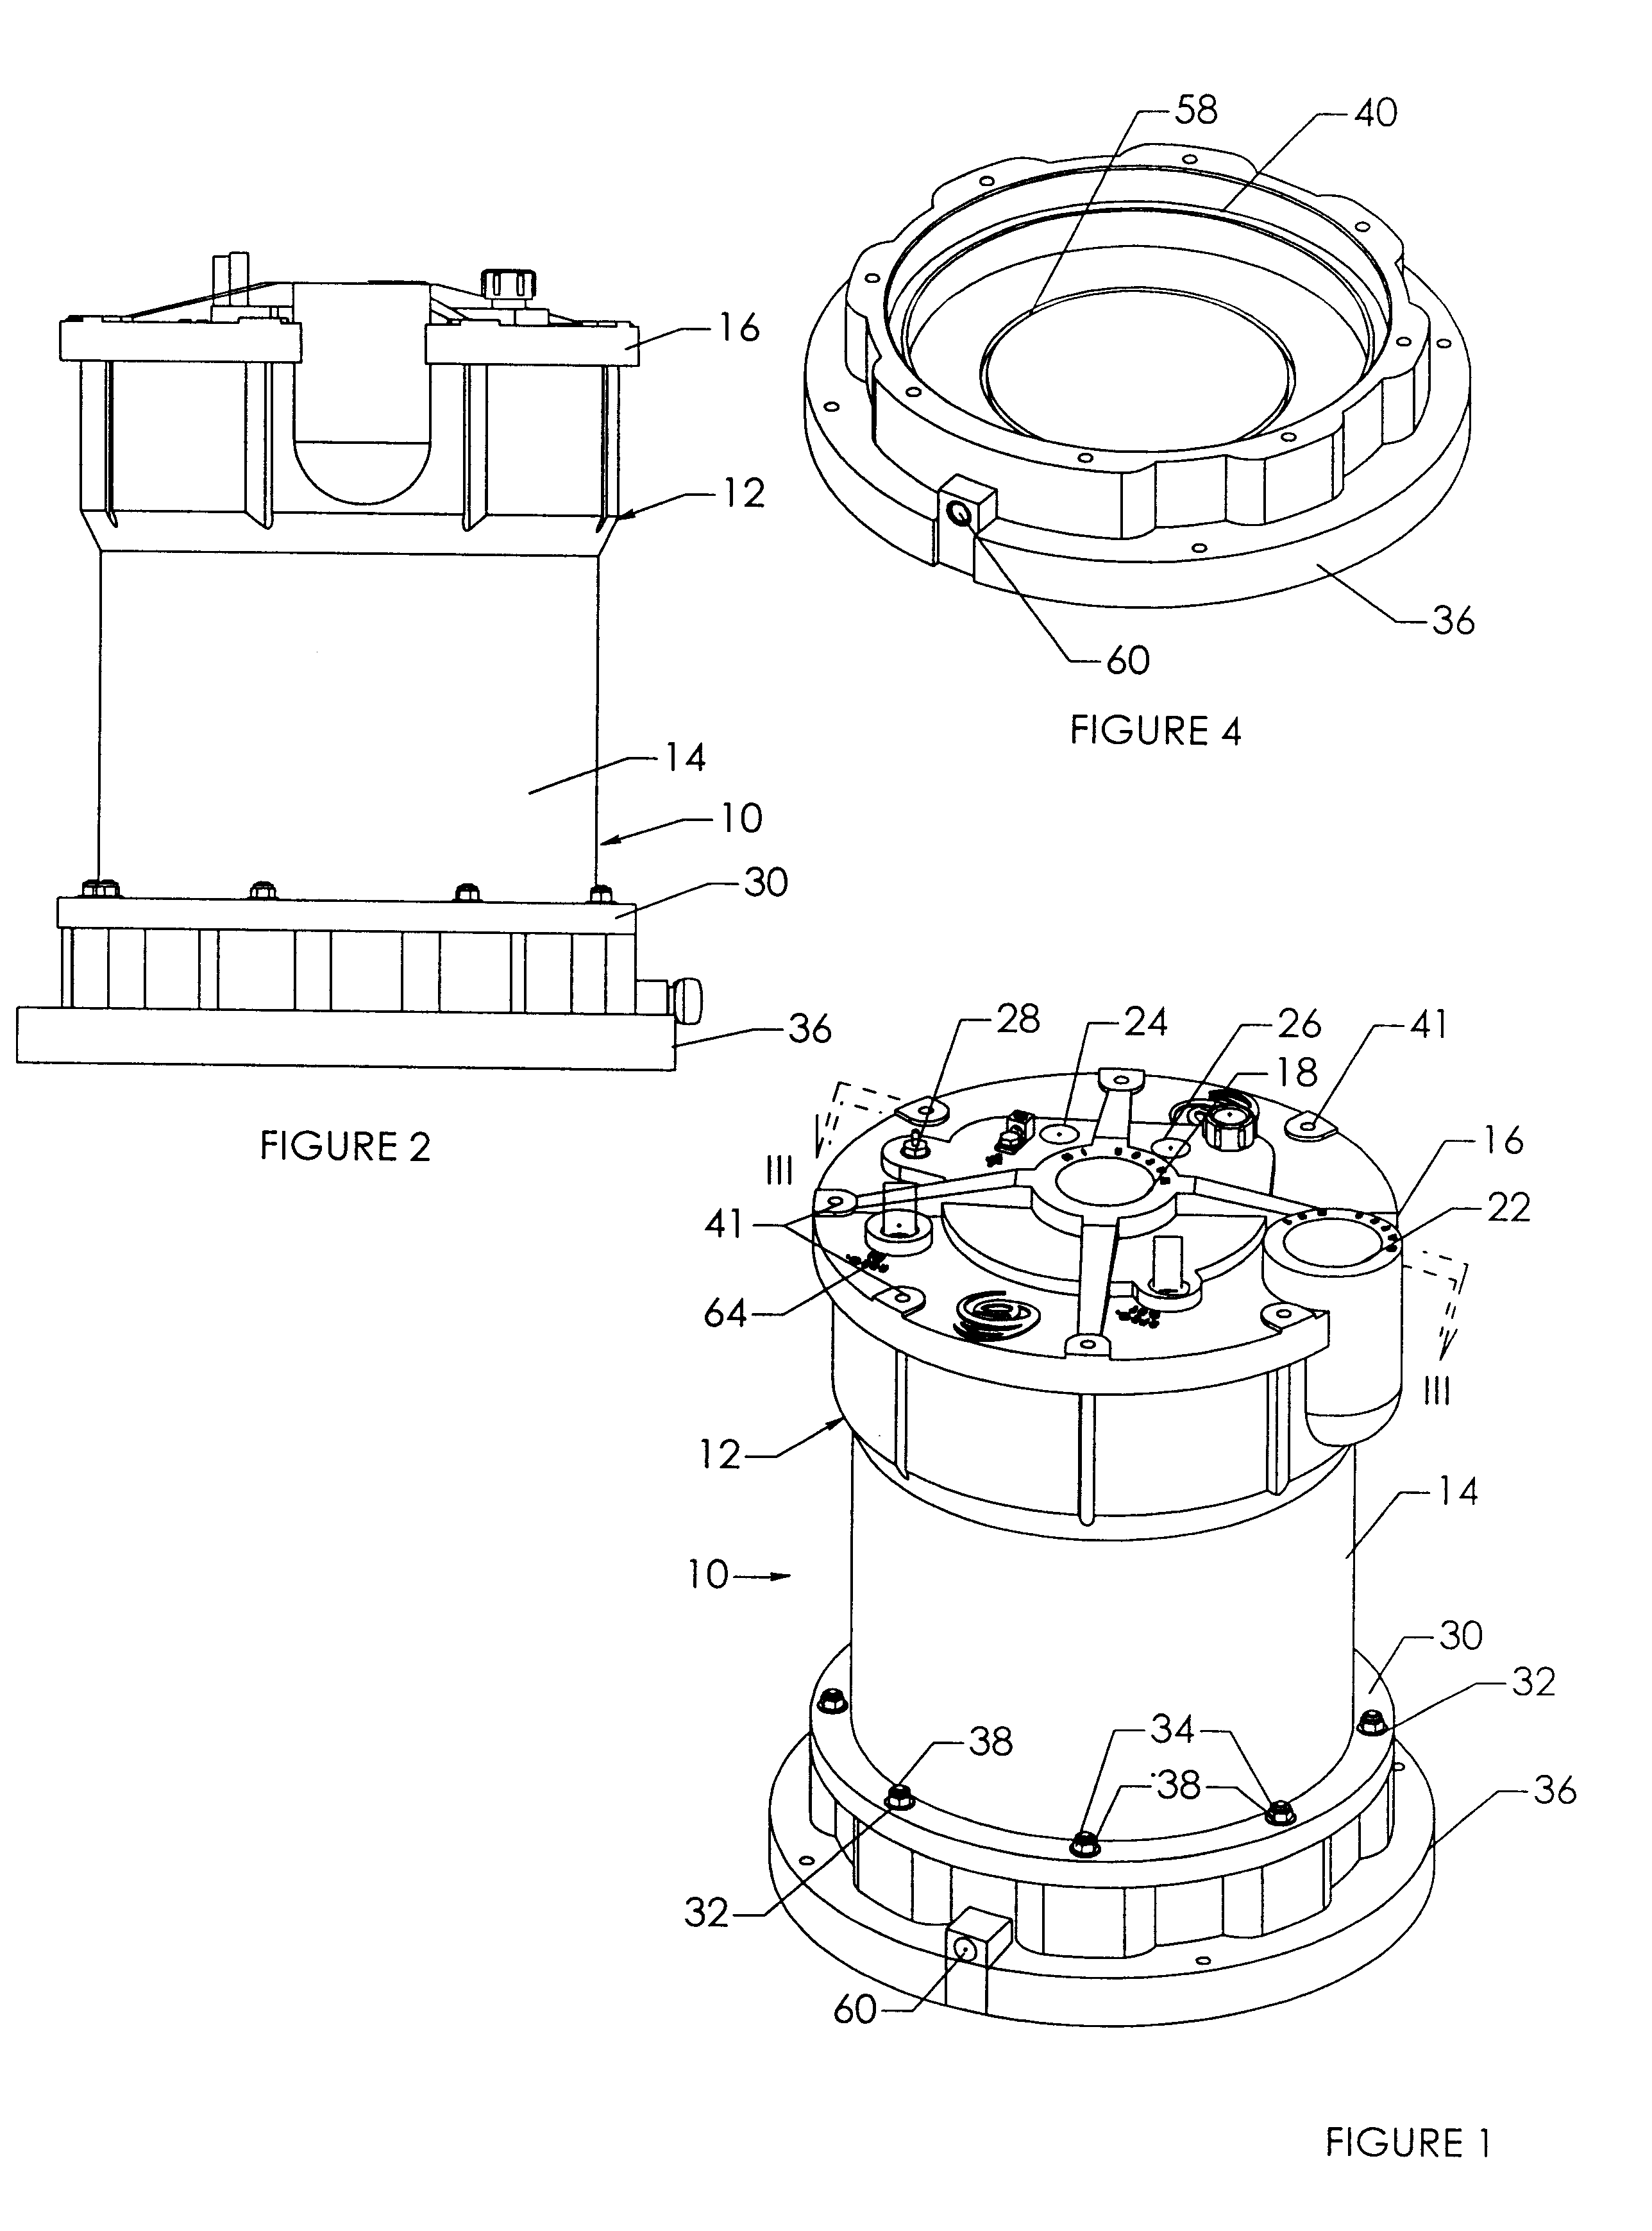 Heat exchanger with two-stage heat transfer